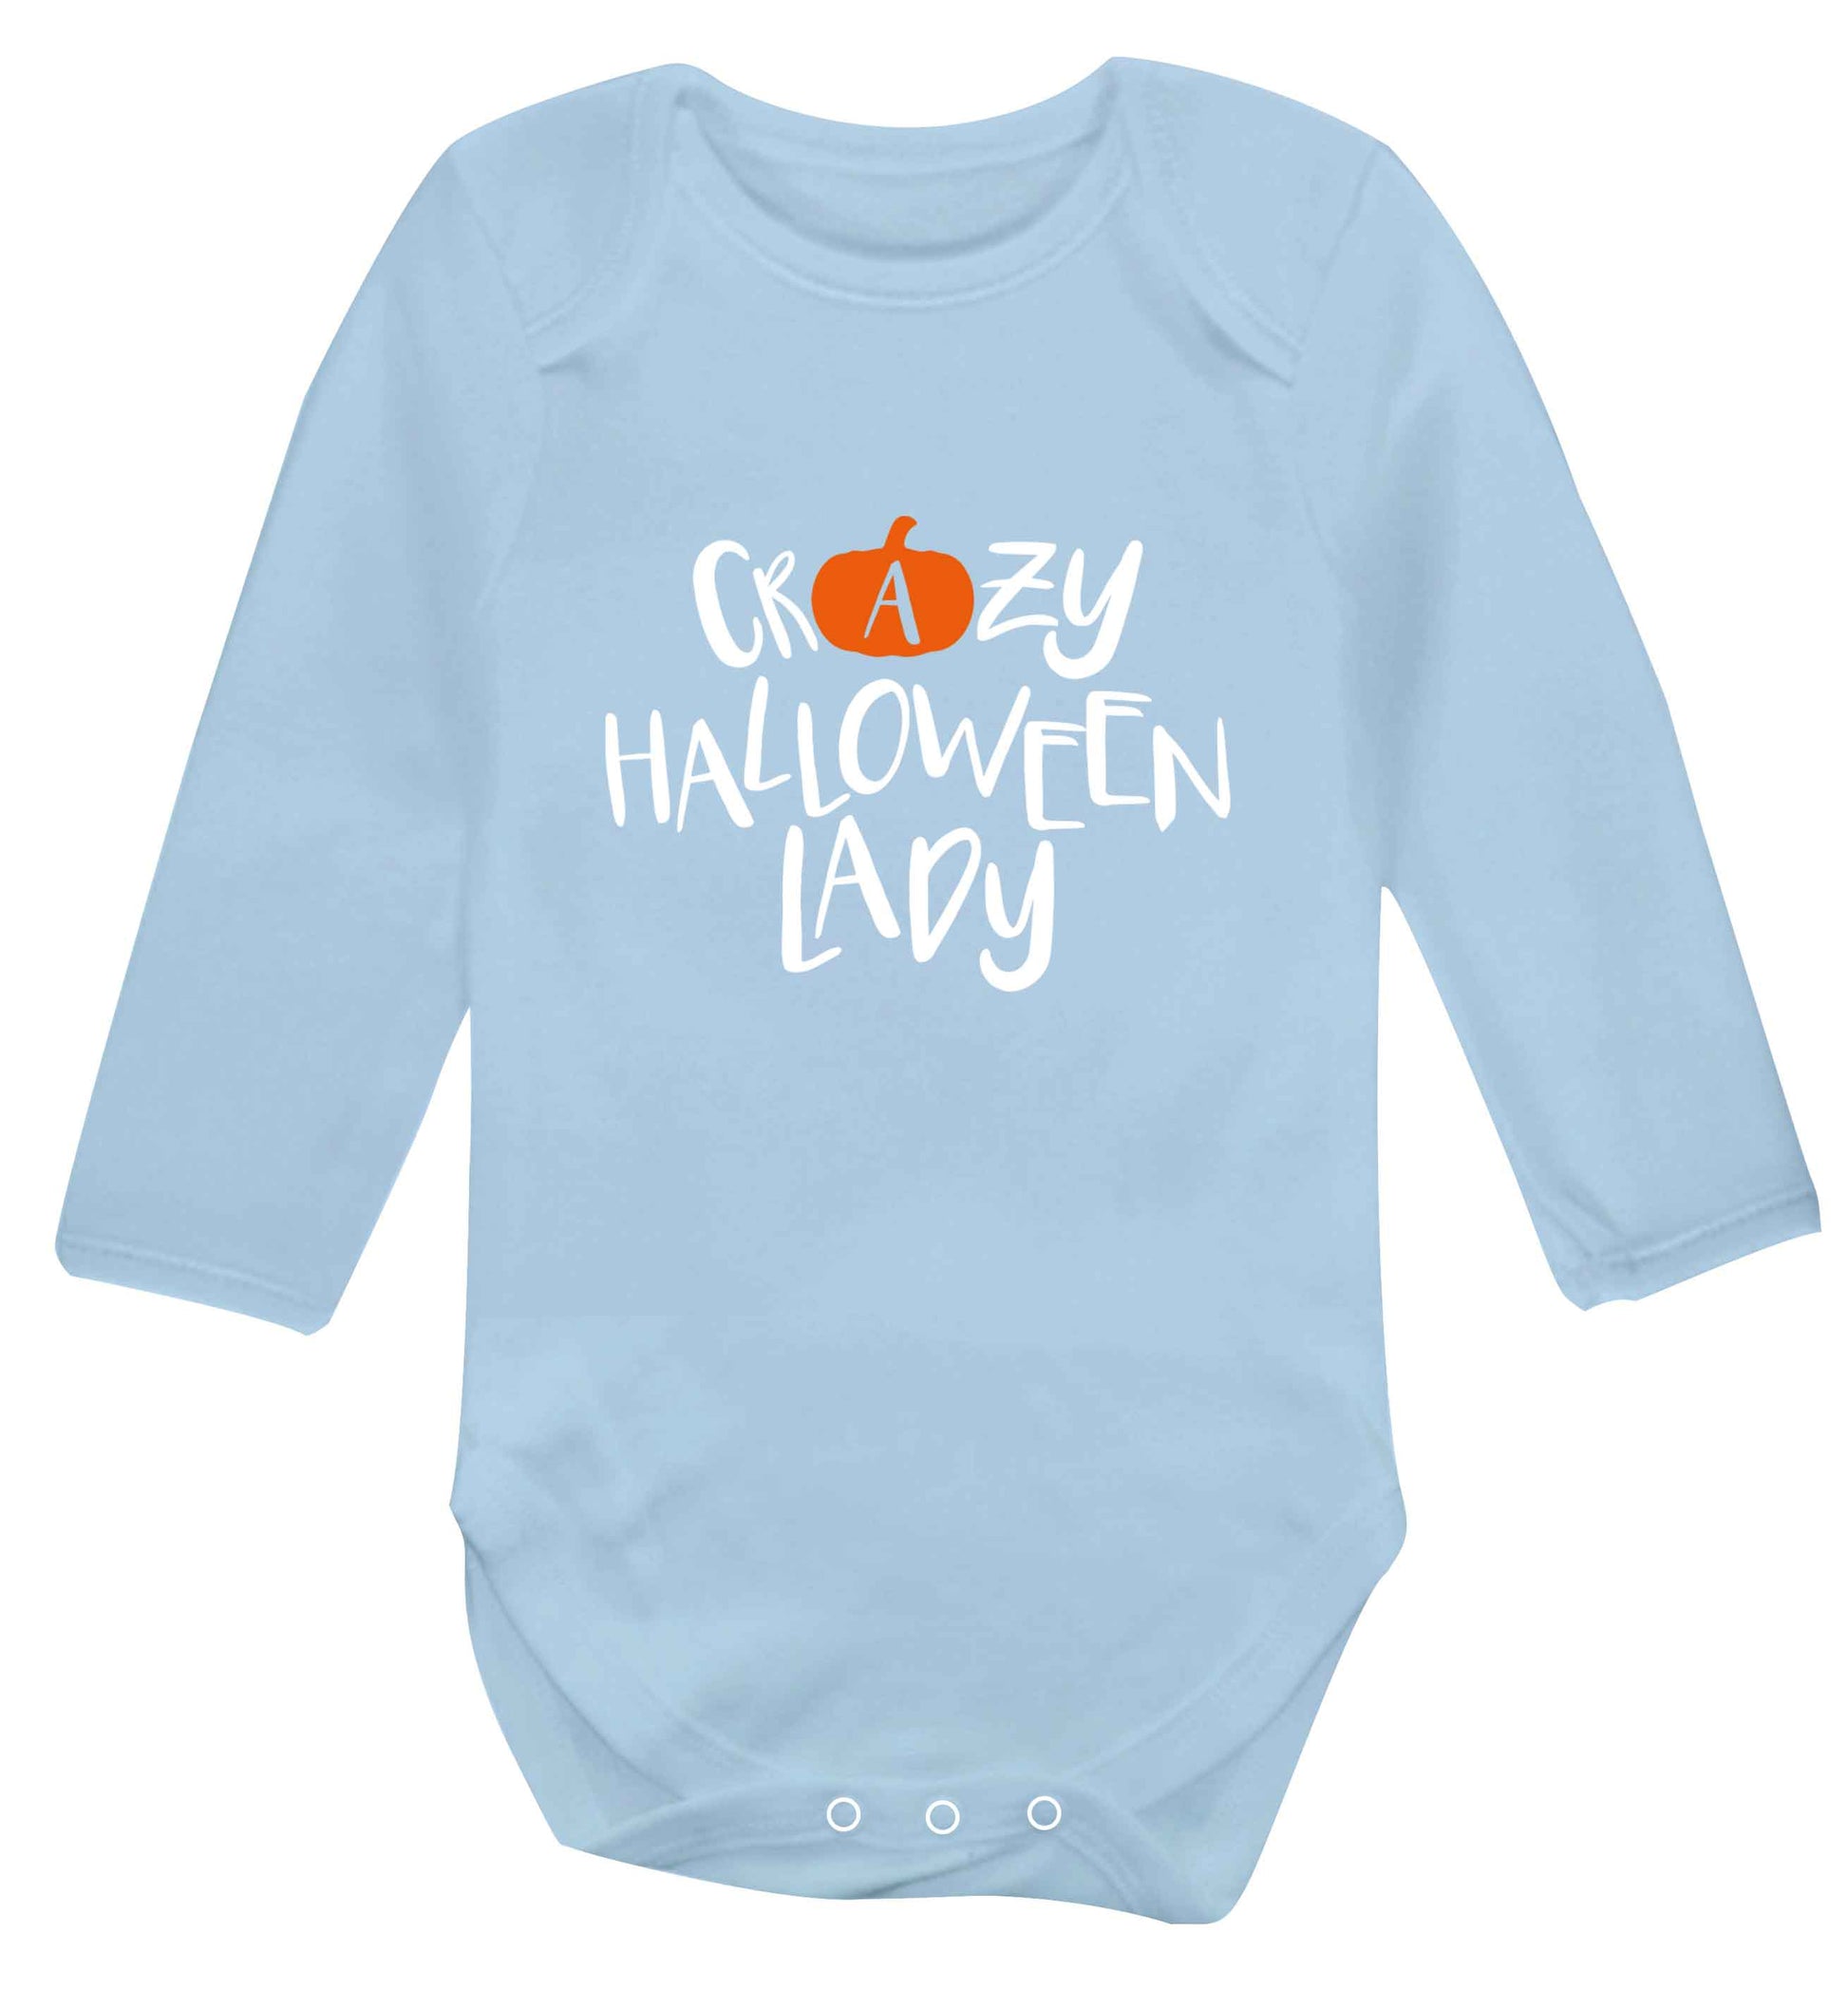 Crazy halloween lady baby vest long sleeved pale blue 6-12 months